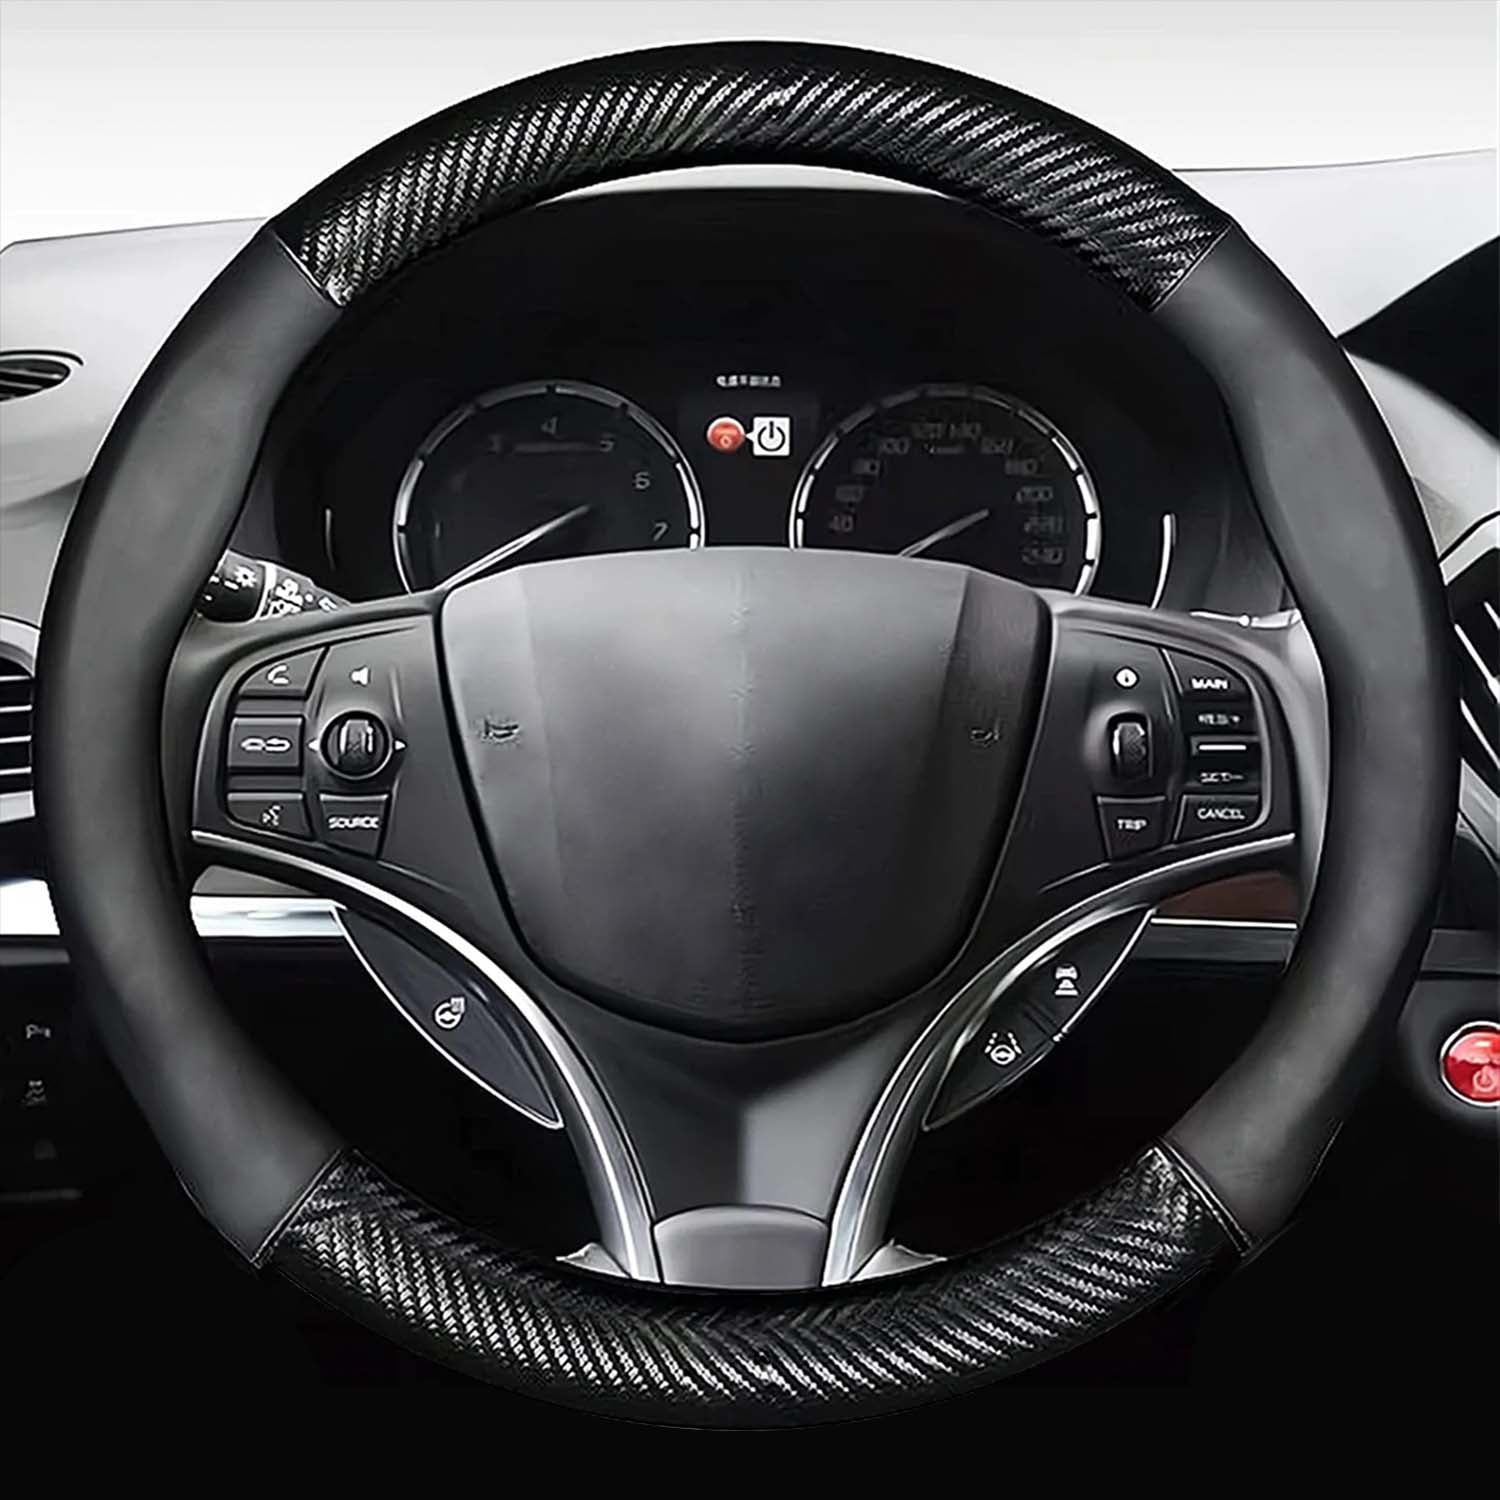 Enhance Your Ride with a Stylish Mitsubishi Steering Wheel Cover